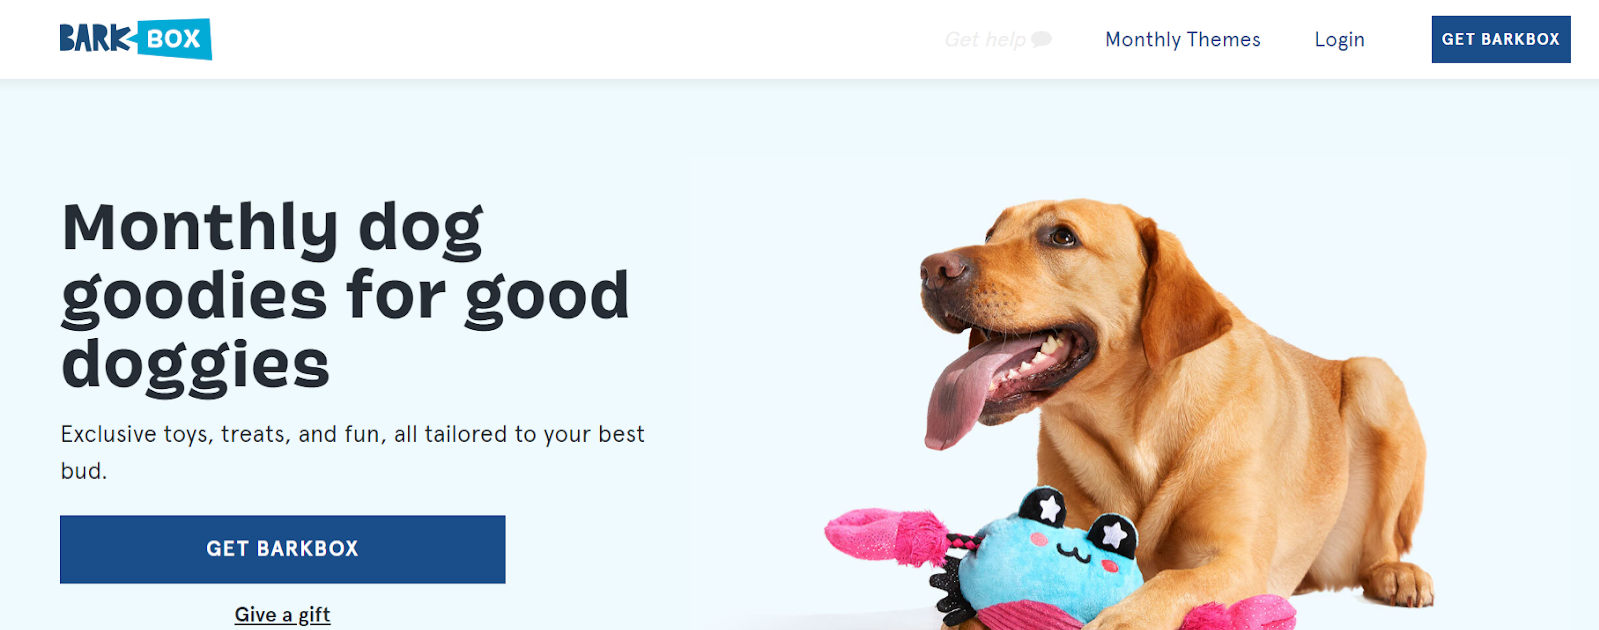 funny landing pages BarkBox